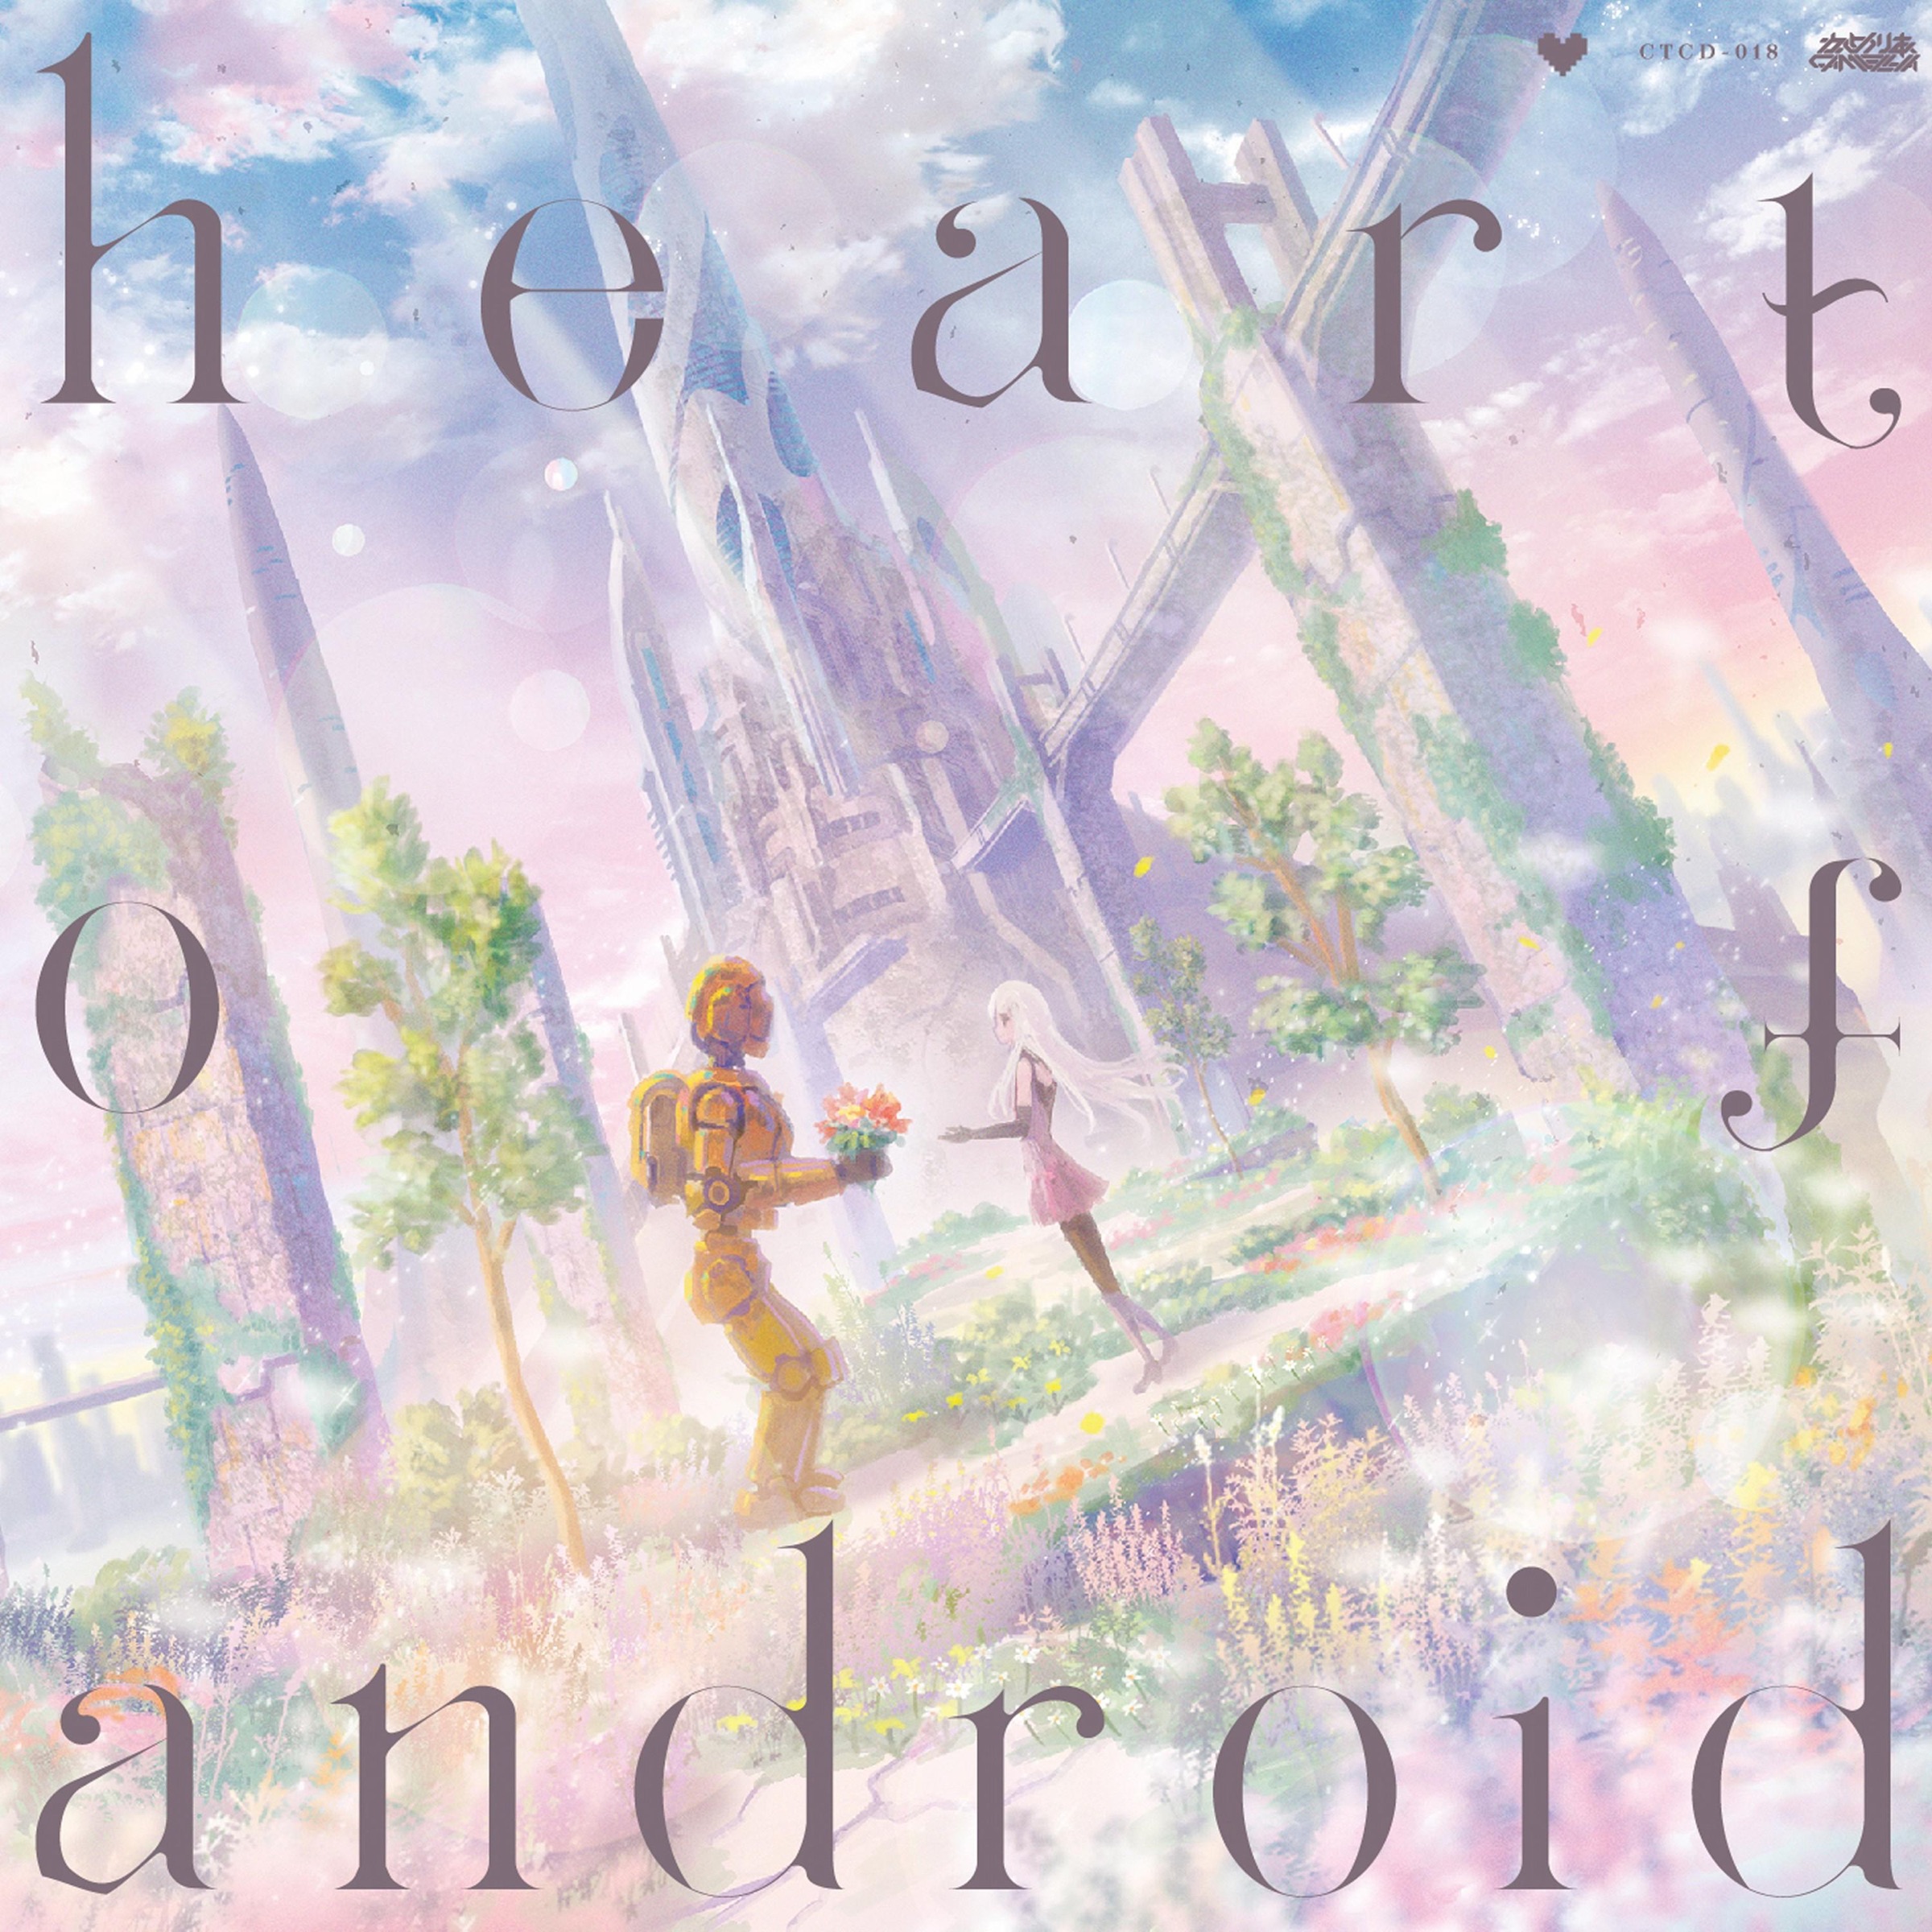 Camellia Heart of Android cover artwork